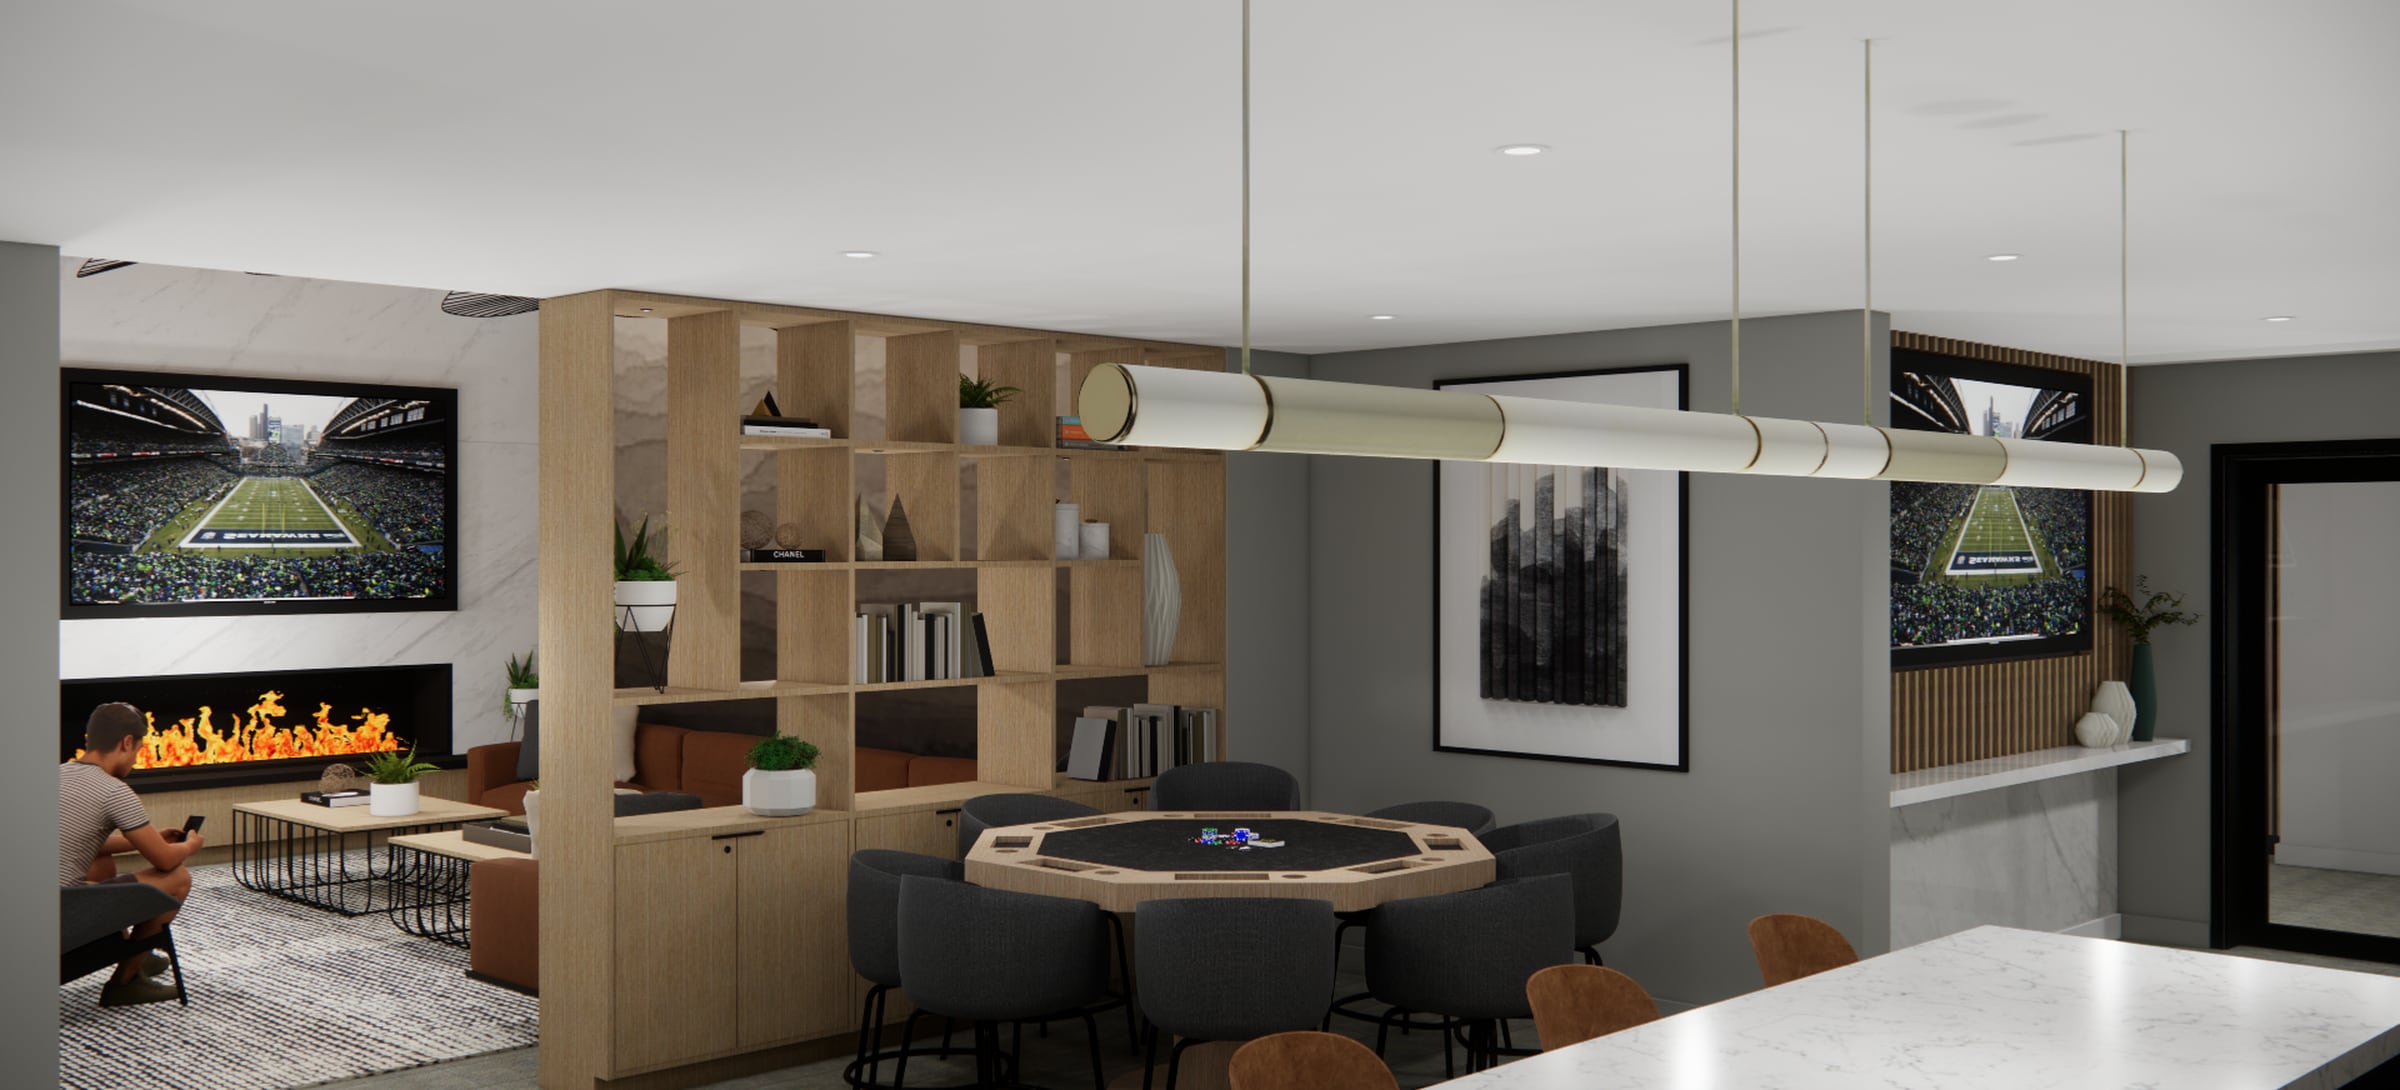 Co-working Lounge (Rendering)